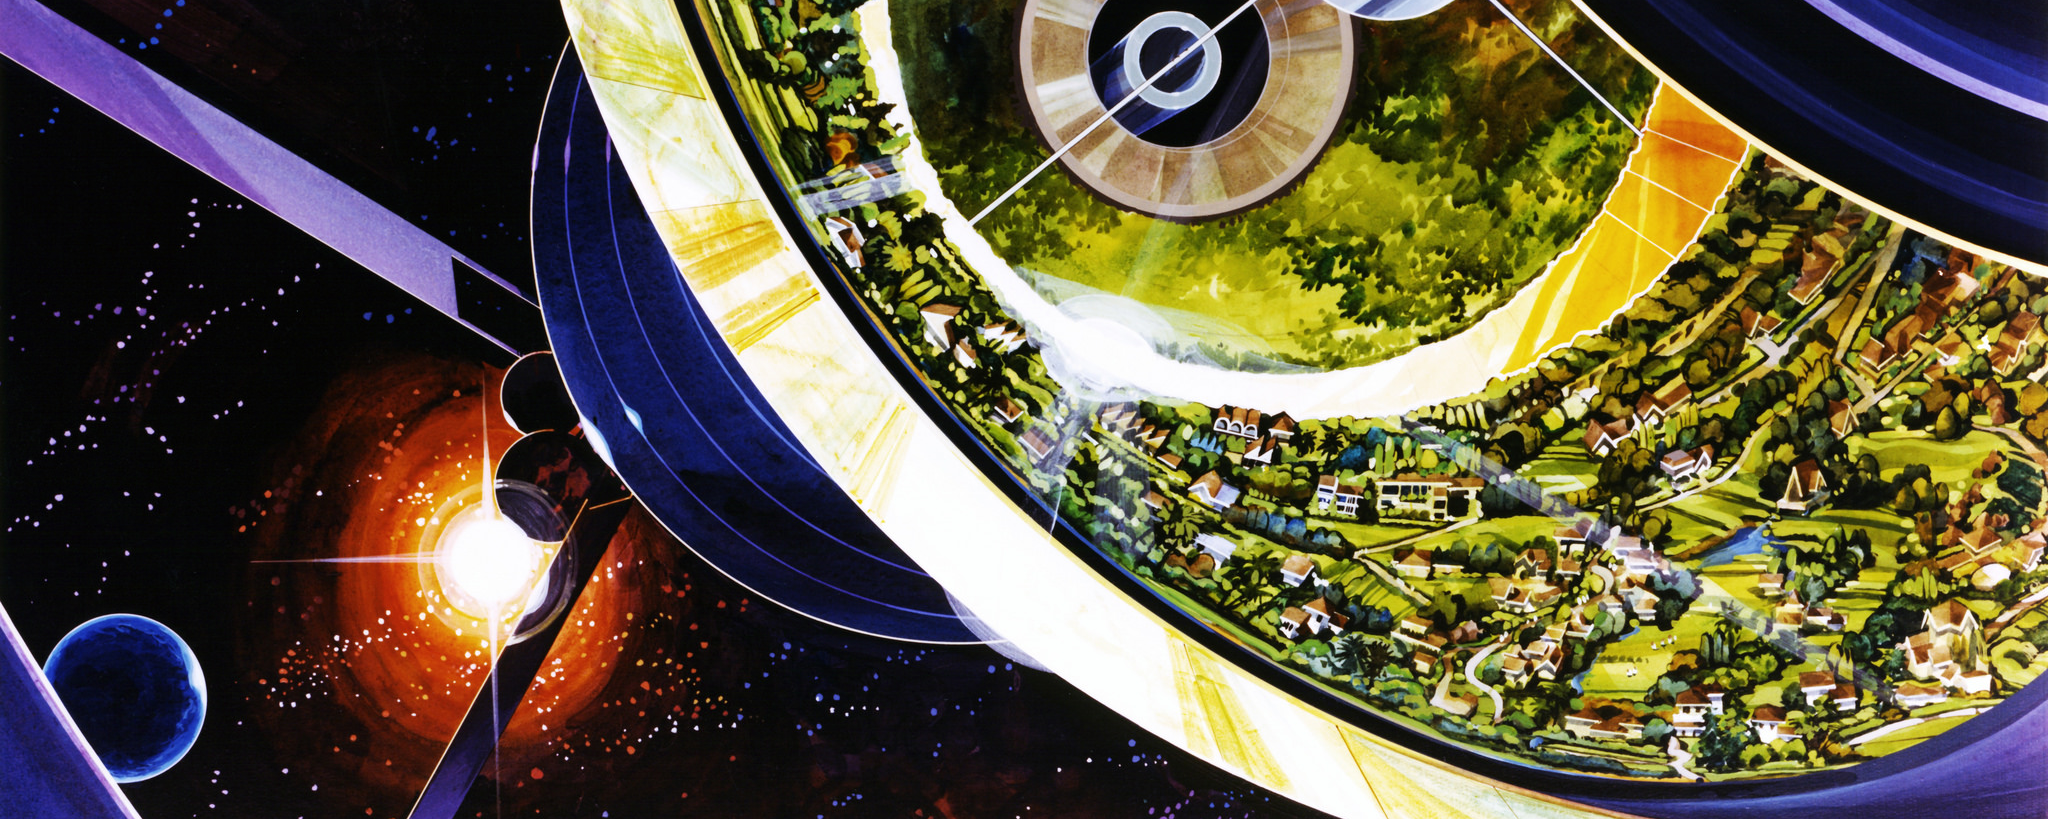 A cutaway illustration of homes, gardens, fields, forests, and rivers inside a huge rotating tubular space station that is sailing through the heavens.